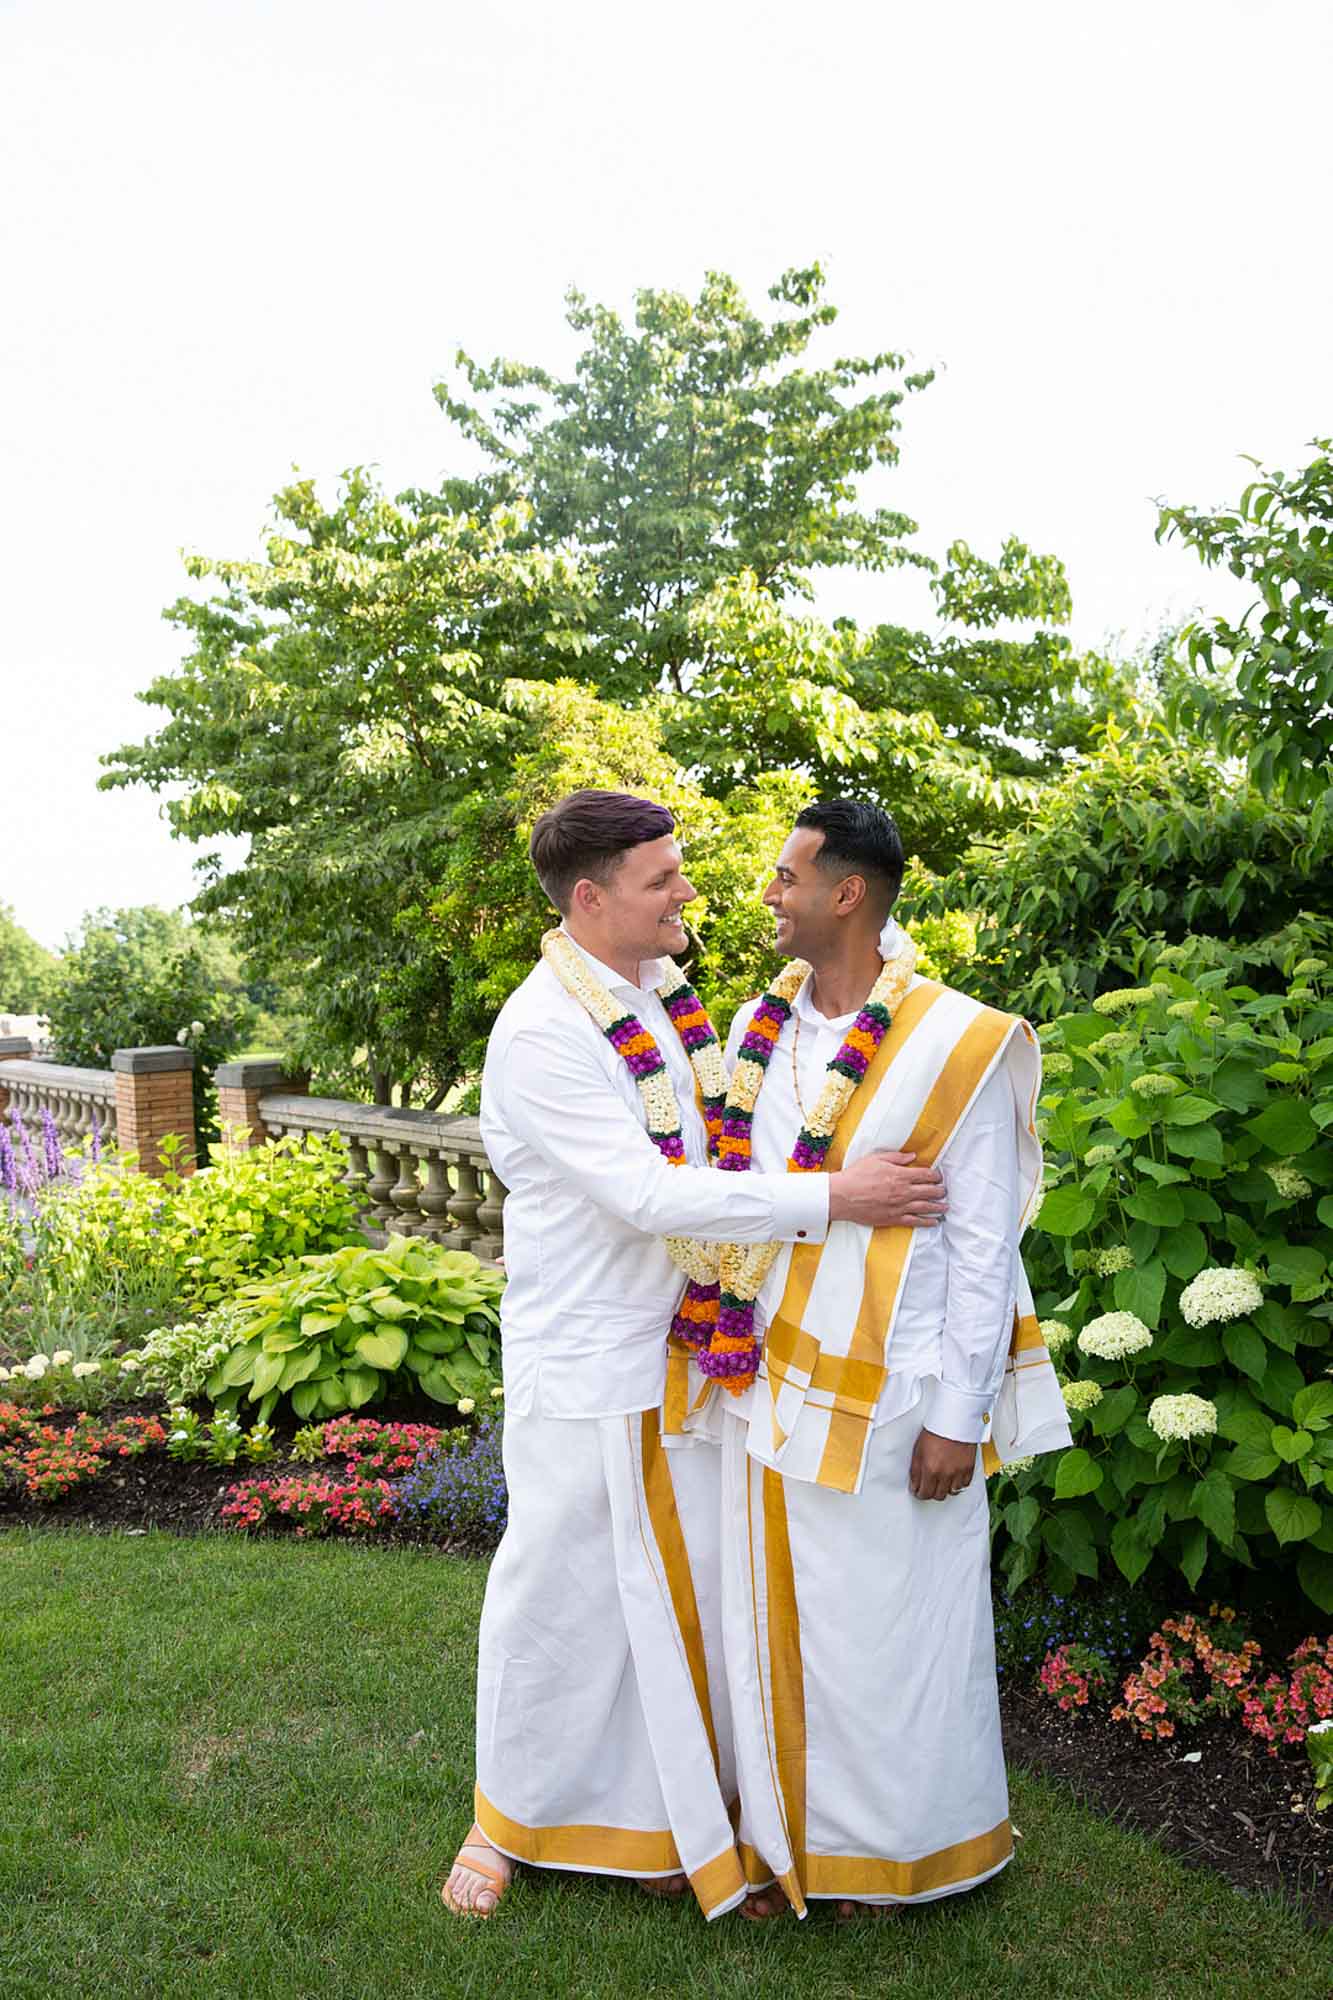 A bold, colorful wedding with Indian traditions and outfit changes | Lorenzini Wedding Photography | Featured on Equally Wed, the leading LGBTQ+ wedding magazine